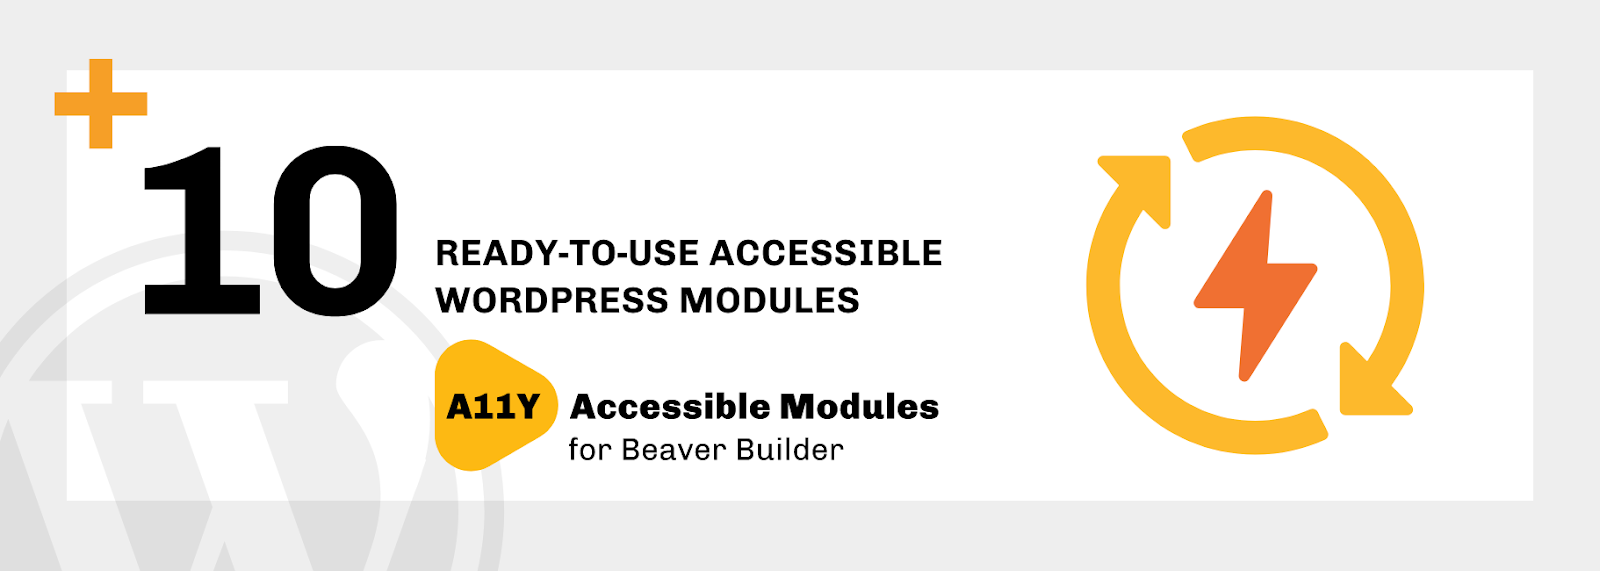 White rectangular graphic with light gray border. WordPress logo is partially transparent in bottom left corner. Black text reads "10 Ready to Use Accessible WordPress Modules" with the Accessible Modules for Beaver Builder logo below it. An orange icon on the right side of the graphic has two arrows that form a circle, with a lightning bolt in the center.